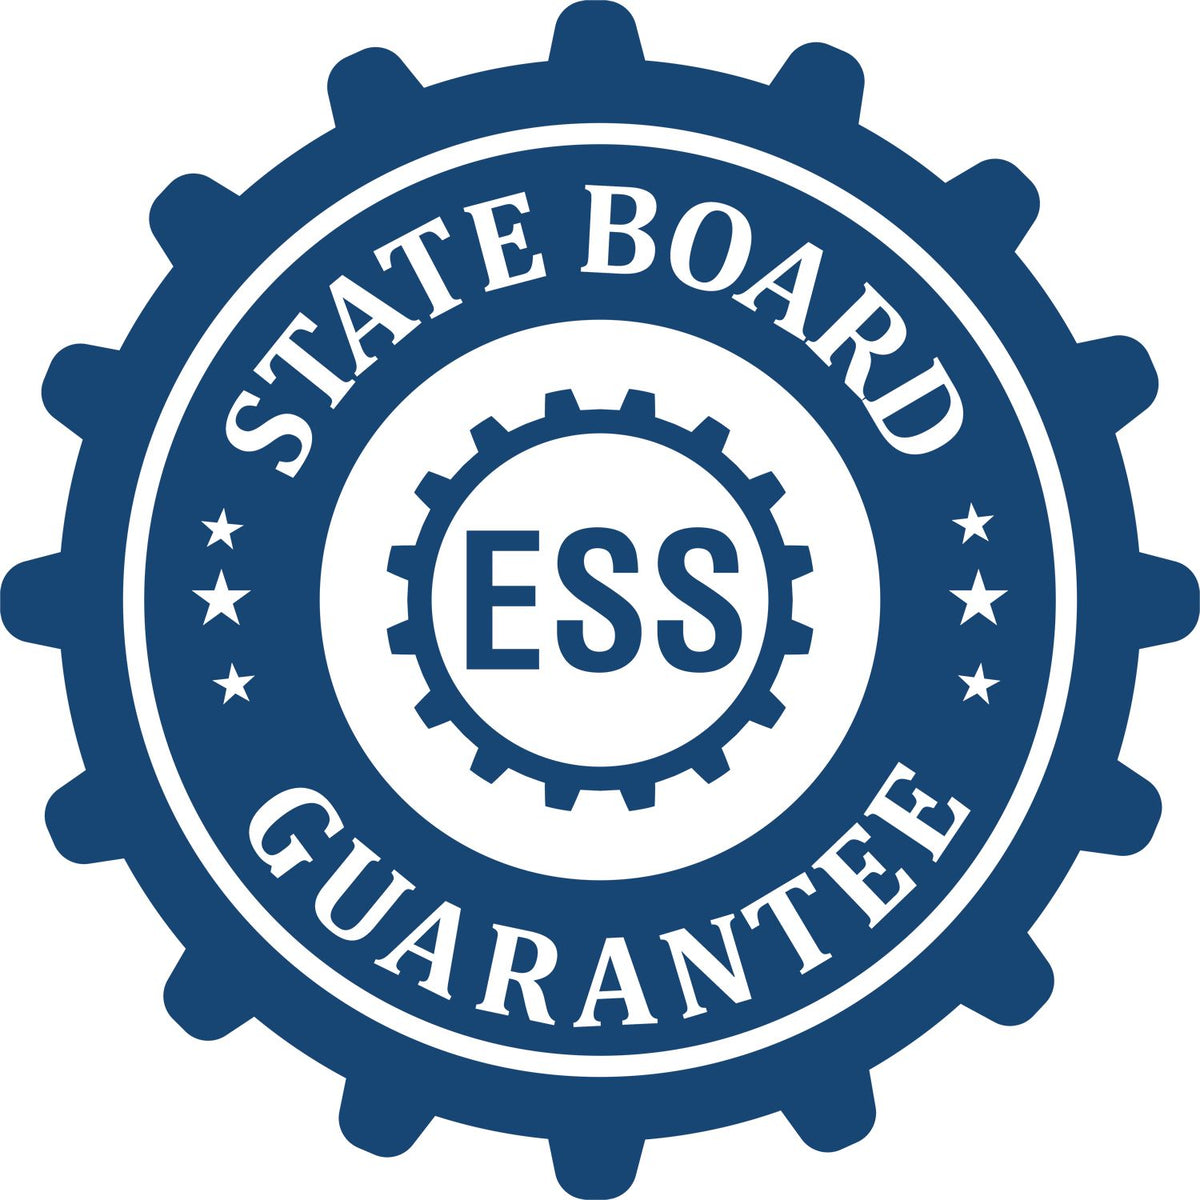 An emblem in a gear shape illustrating a state board guarantee for the Delaware Professional Engineer Seal Stamp product.